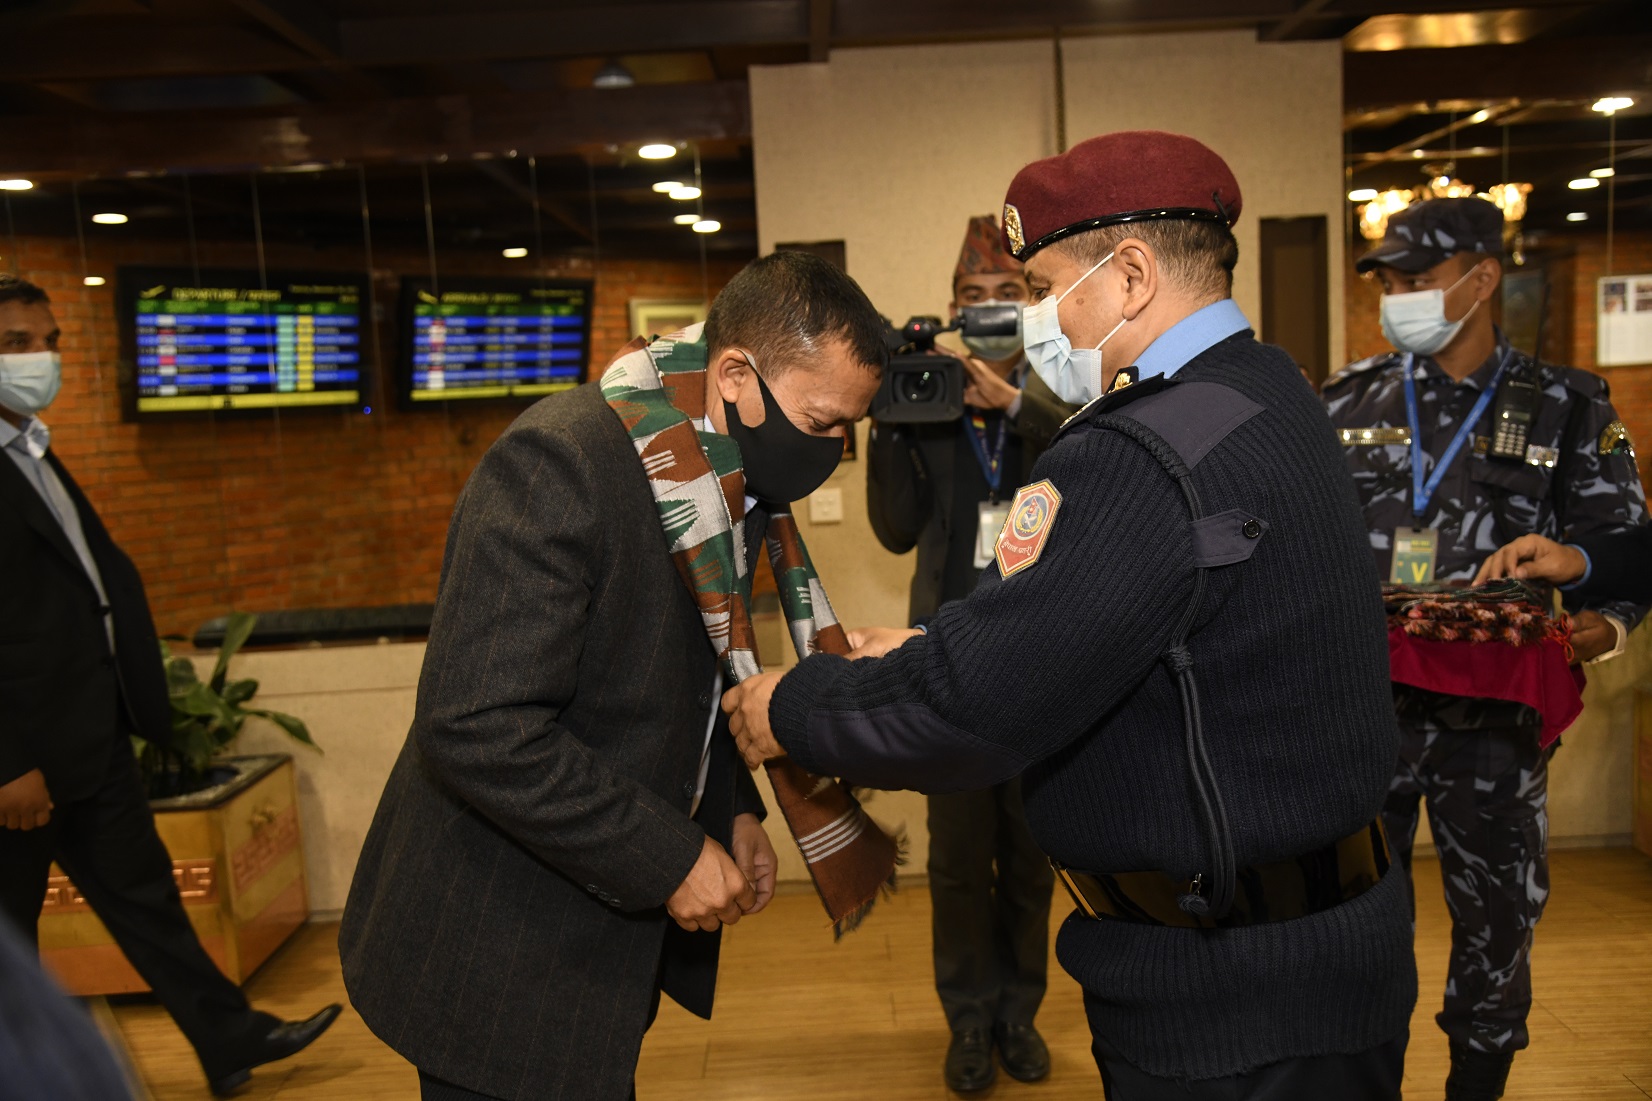 IGP Thapa returns home after attending INTERPOL General Assembly